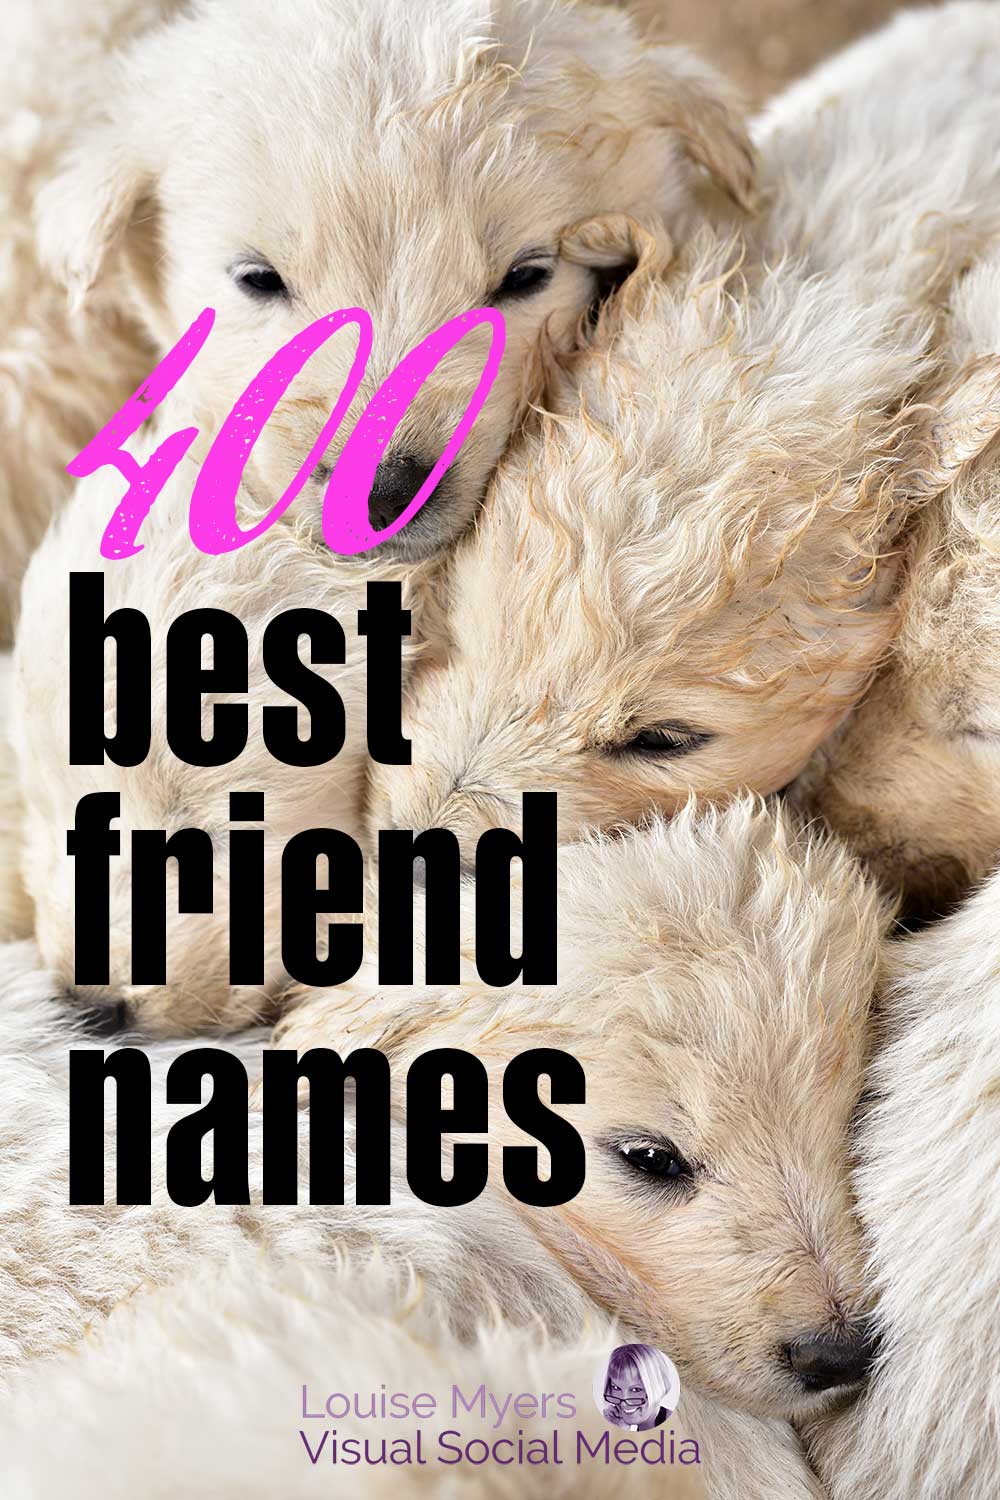 closeup of fuzzy puppies with text 400 best friend names.